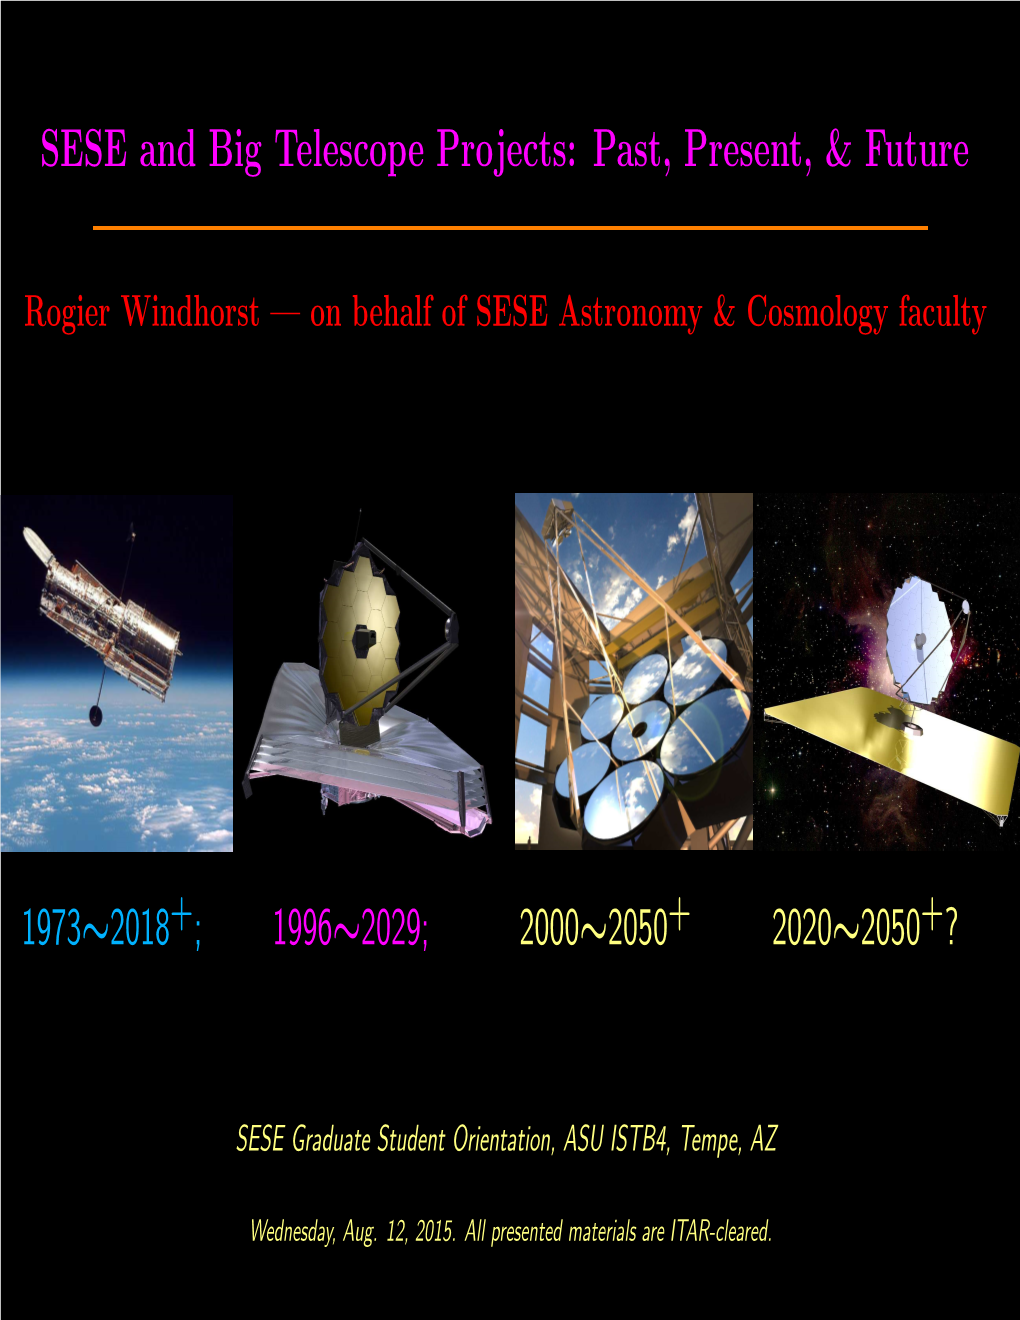 SESE and Big Telescope Projects: Past, Present, & Future